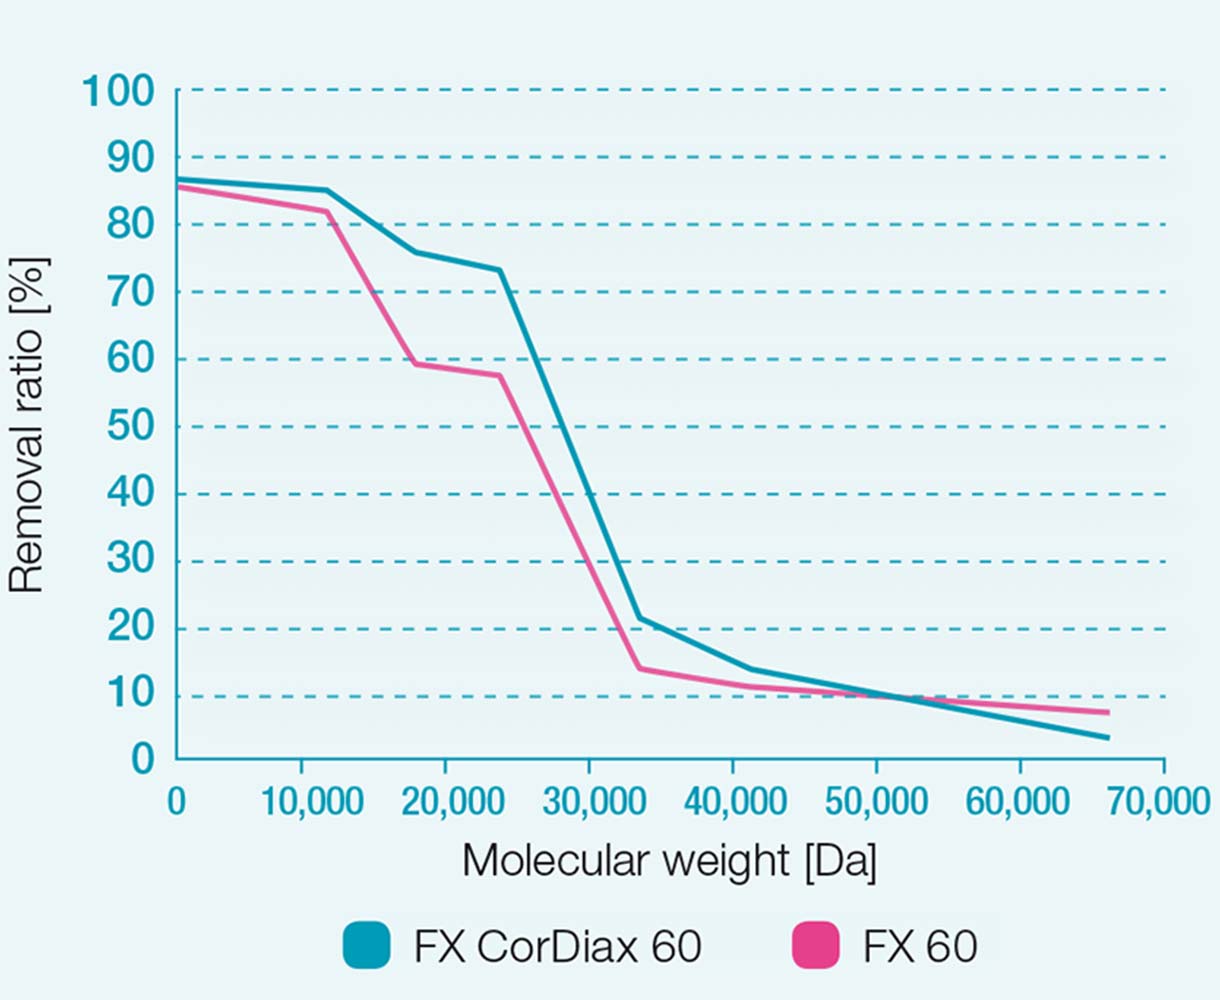 Removal ratios of the FX 60 and FX CorDiax 60 dialysers